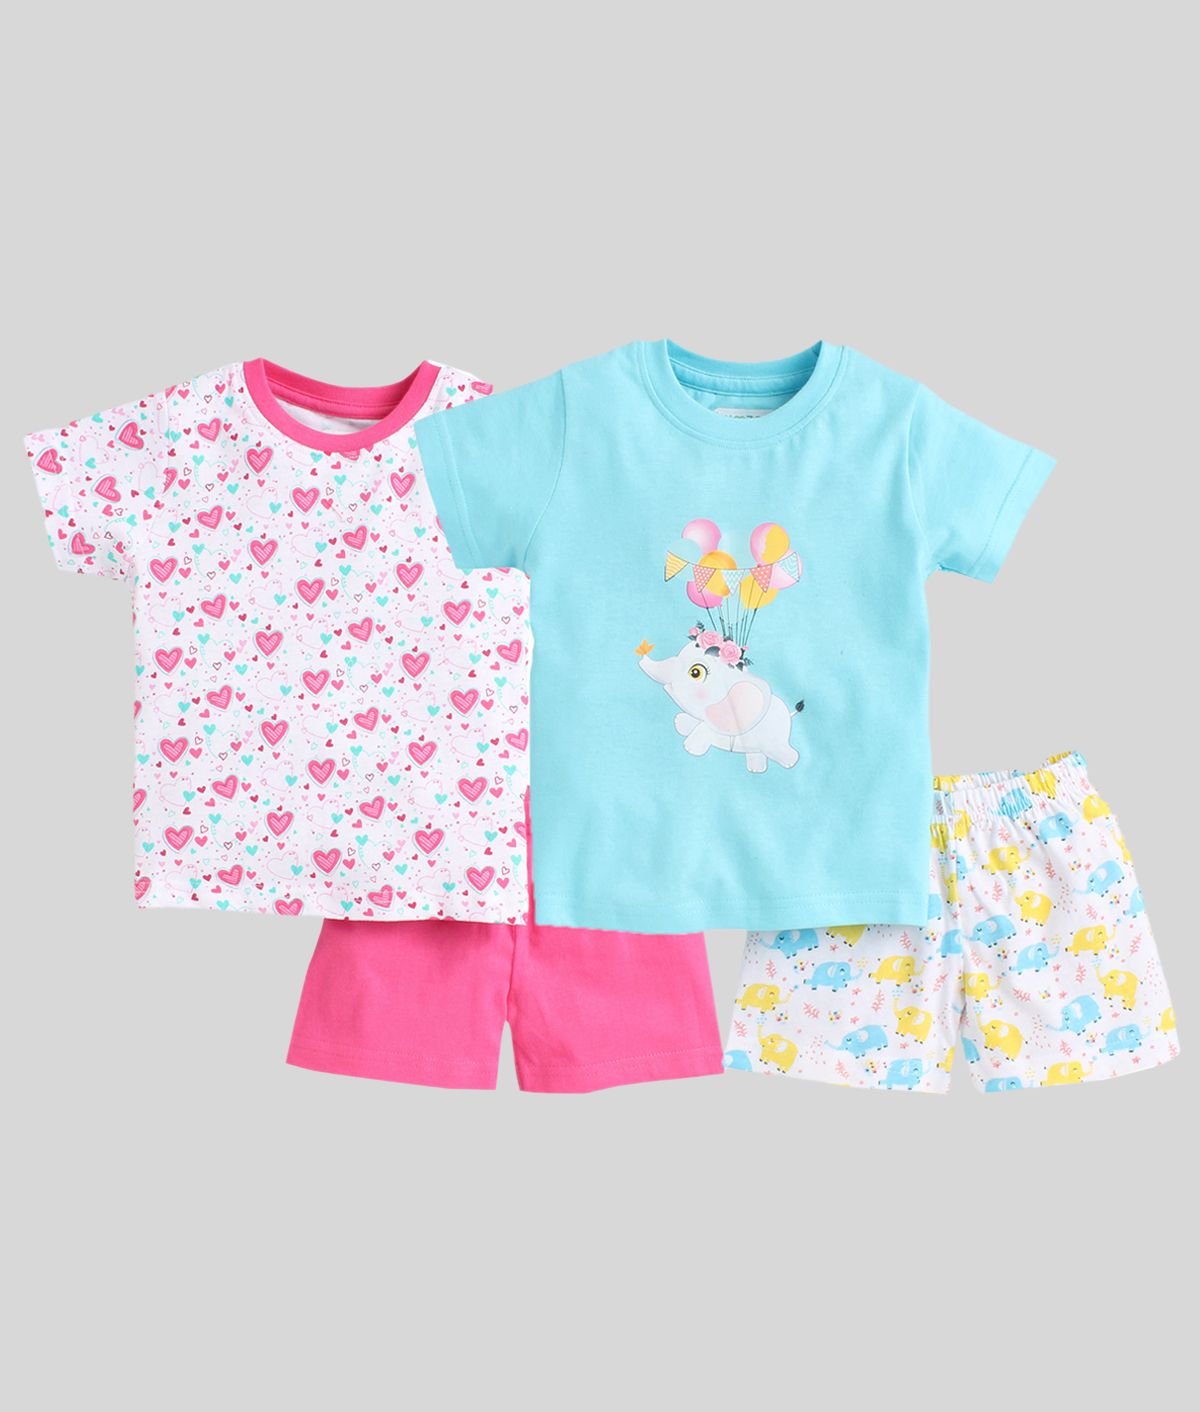 BUMZEE Blue & Pink Baby Girls T-Shirt & Shorts Set Pack of 2 Age - 12-18 Months